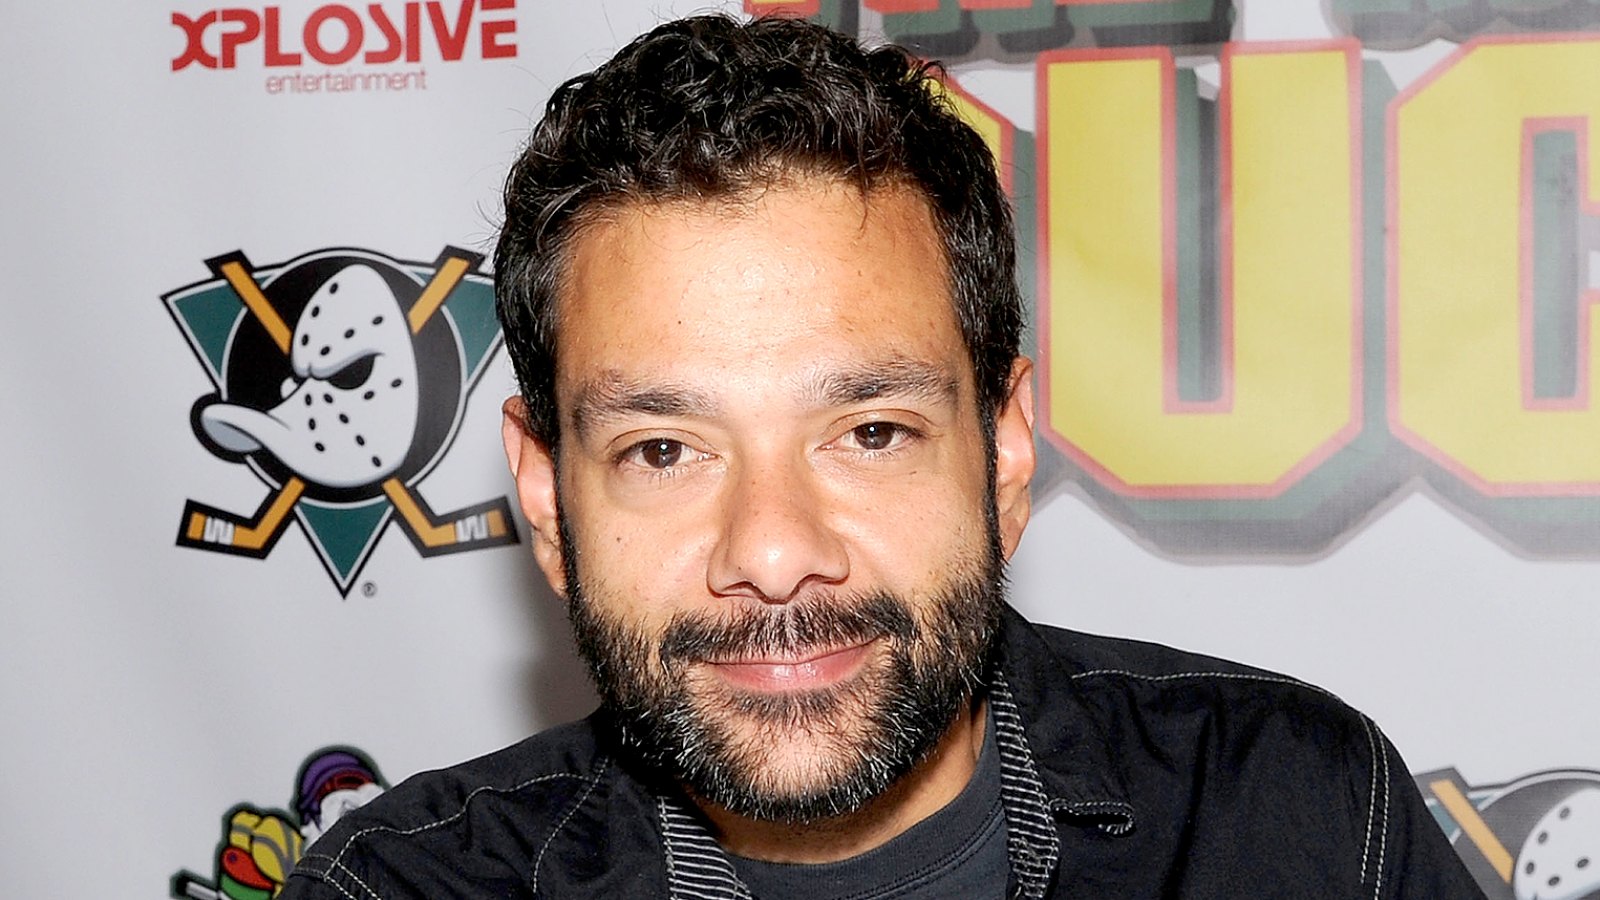 Shaun Weiss from the movie "The Mighty Ducks" attends day 2 of the Chiller Theater Expo at Sheraton Parsippany Hotel on April 25, 2015 in Parsippany, New Jersey.